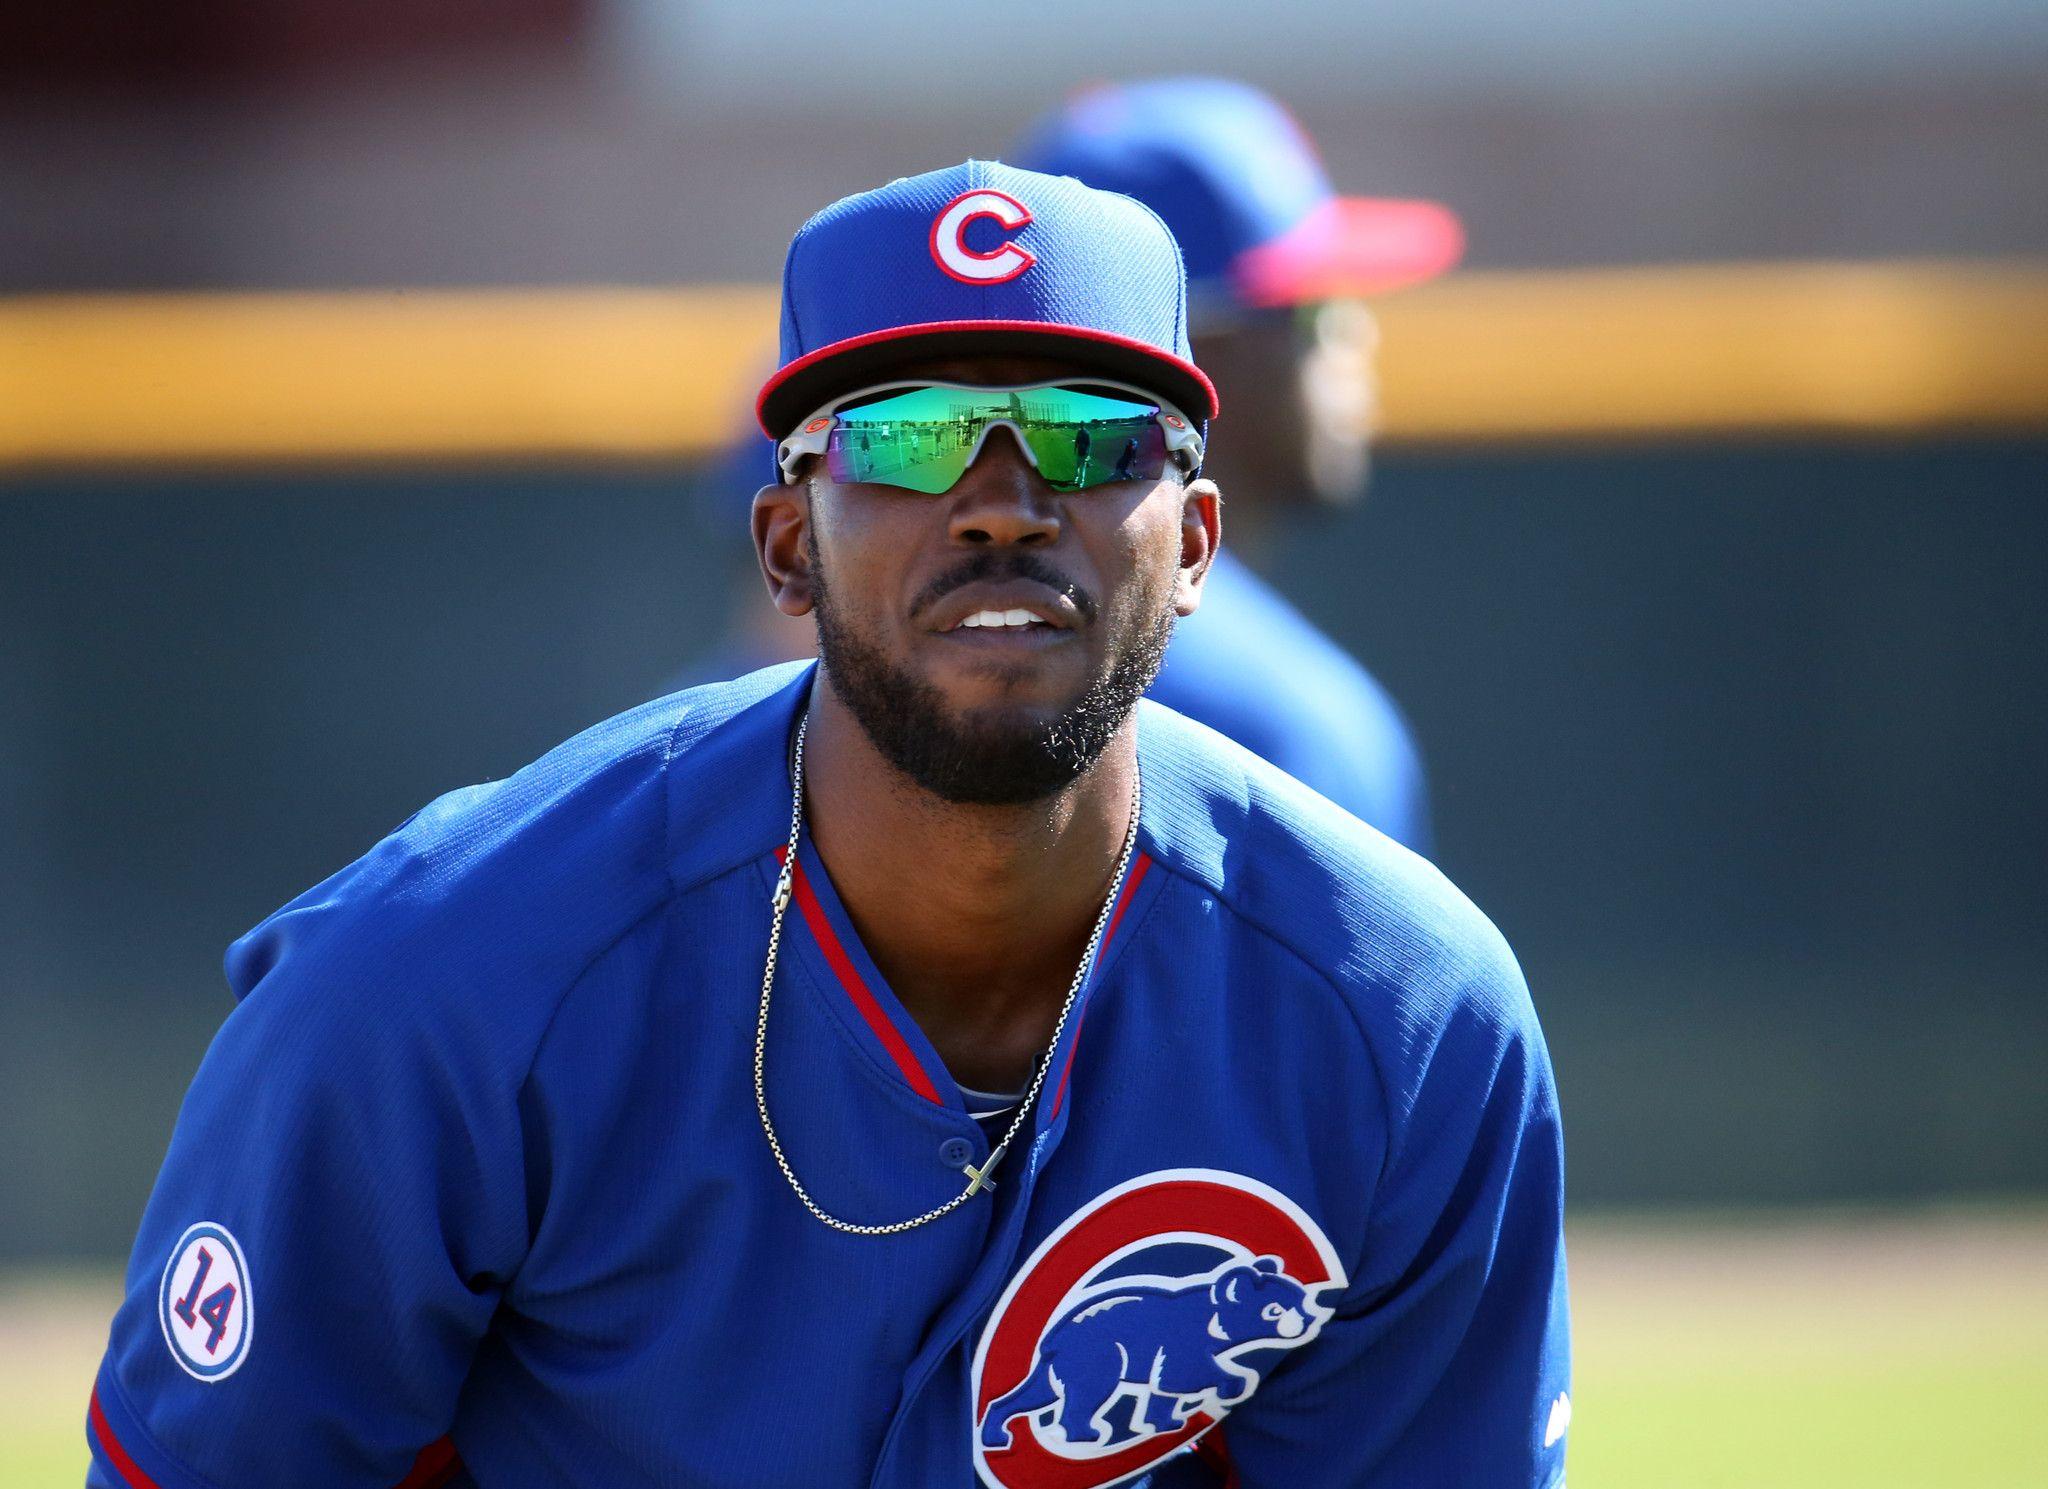 Come from behind haiku: Dexter Fowler saves the day. The Cubs In Haiku